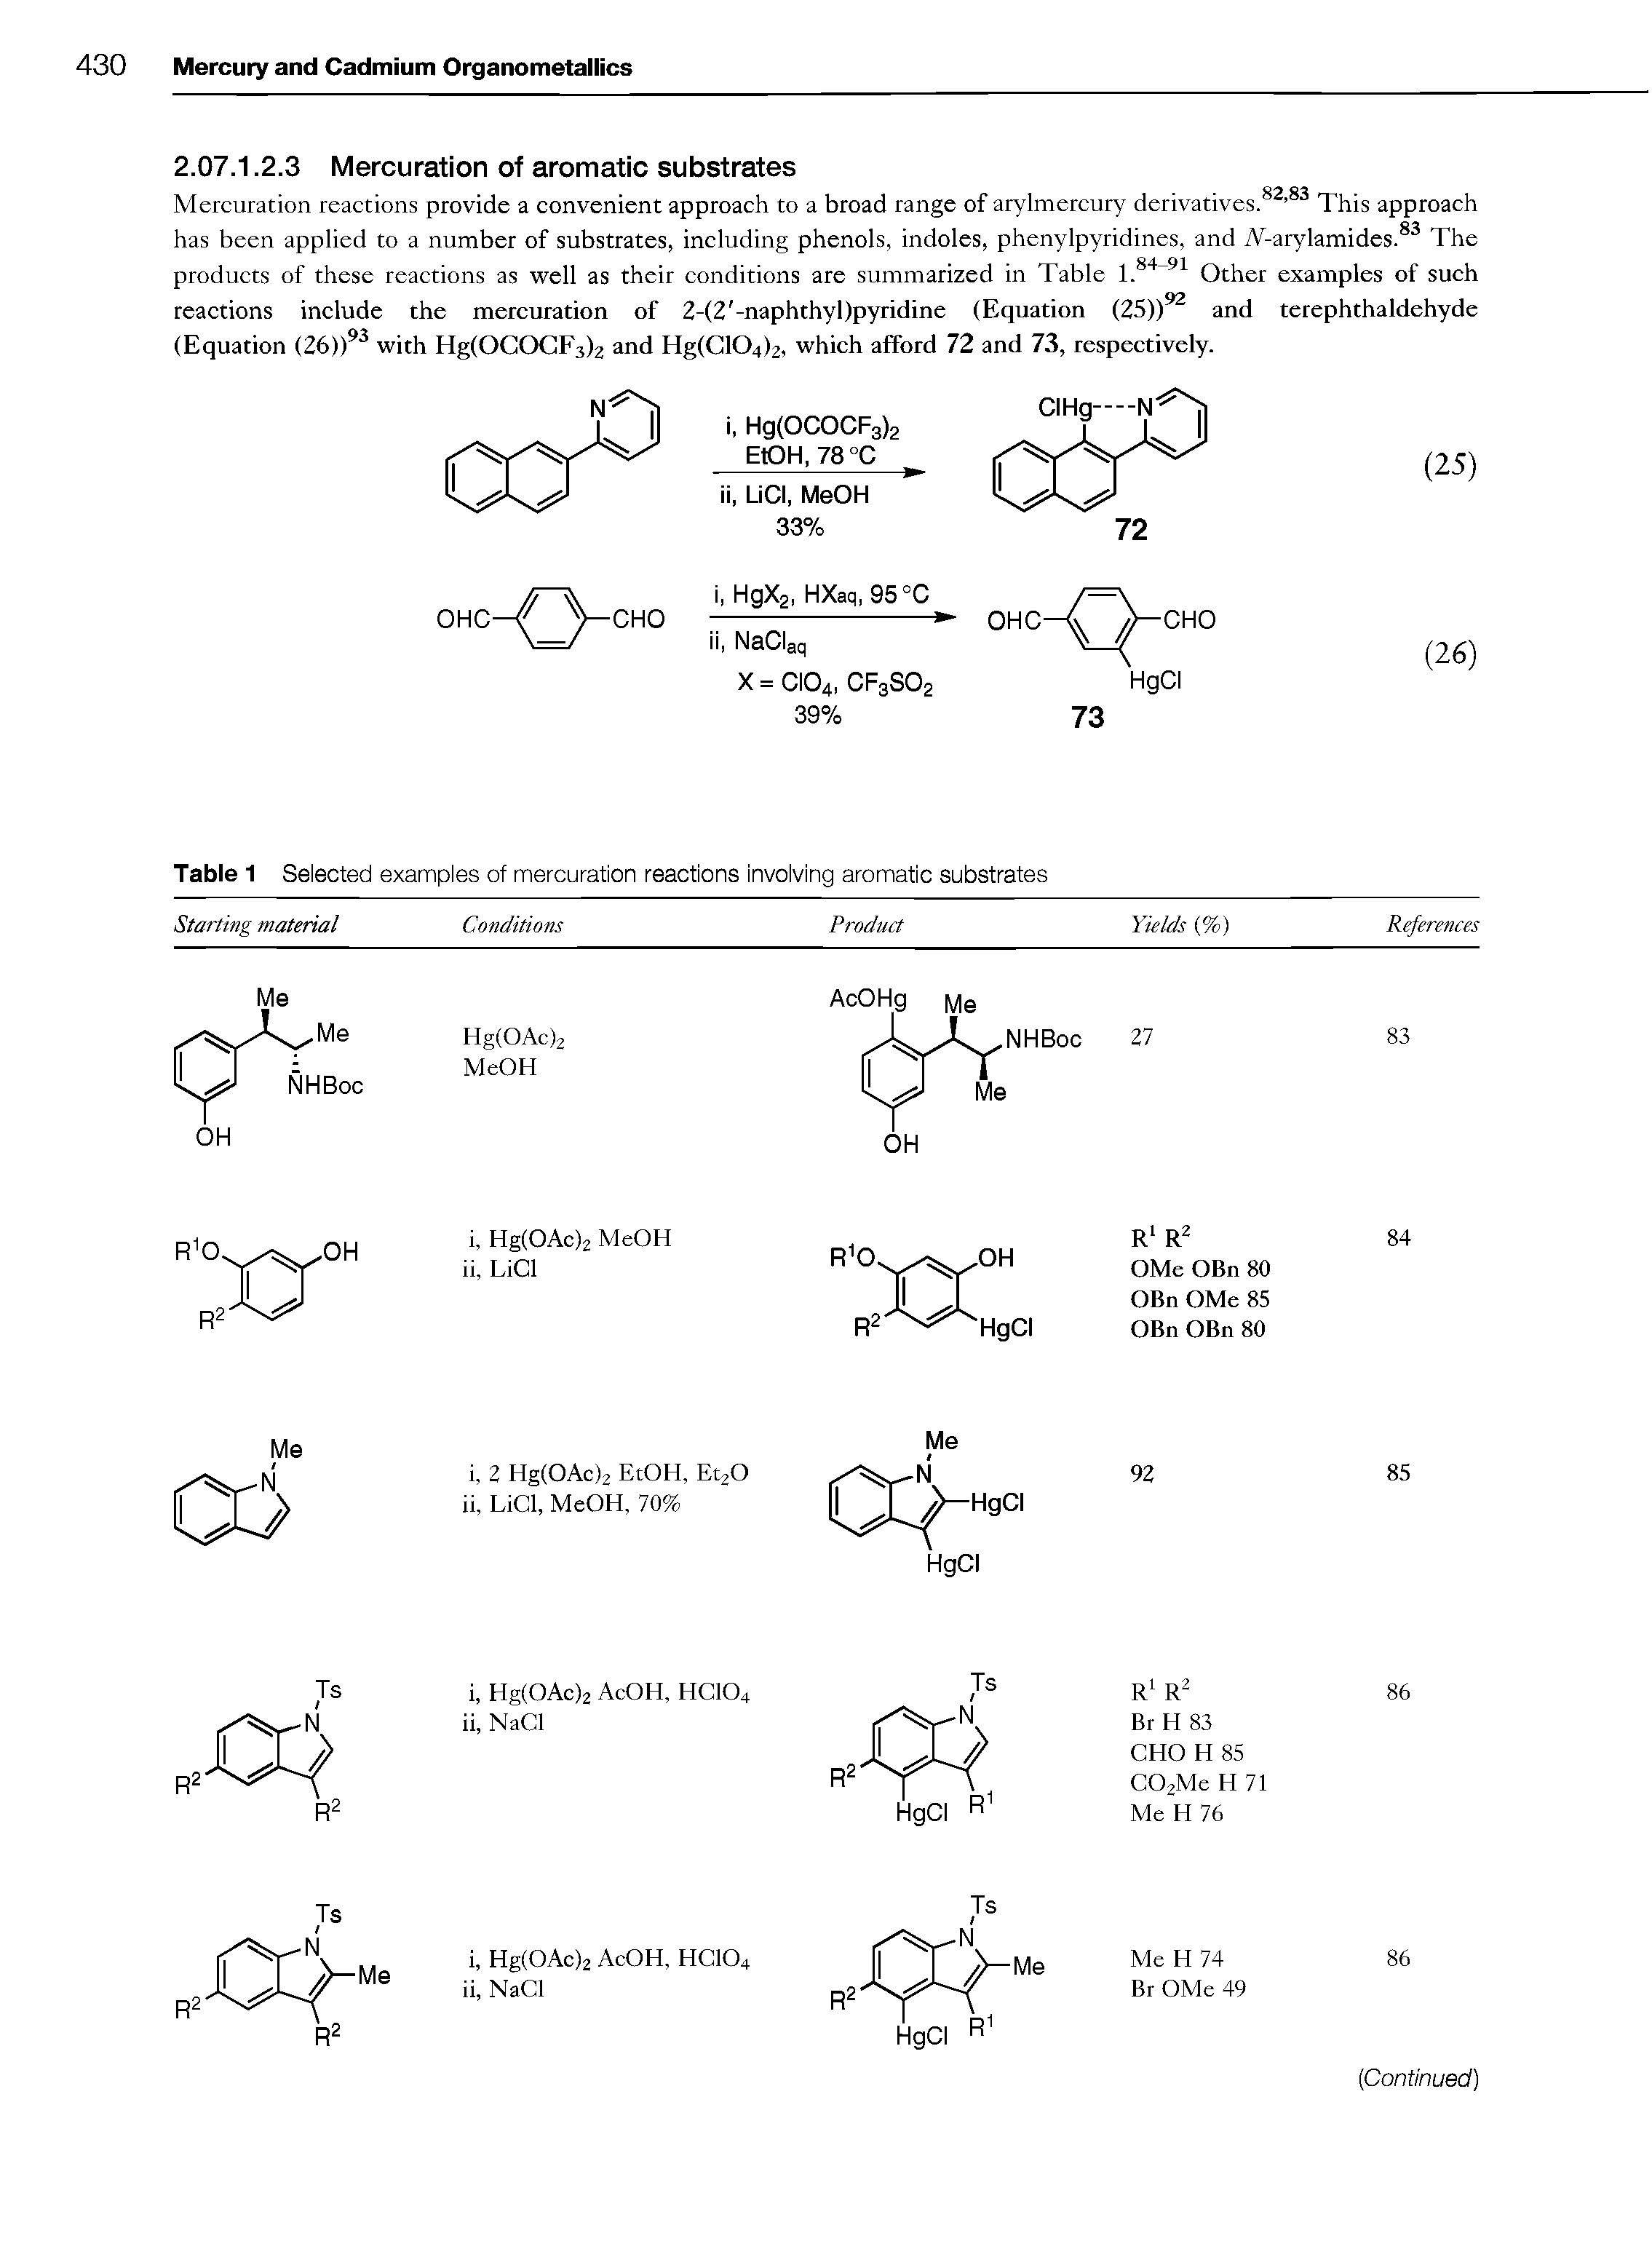 Table 1 Selected examples of mercuration reactions involving aromatic substrates...